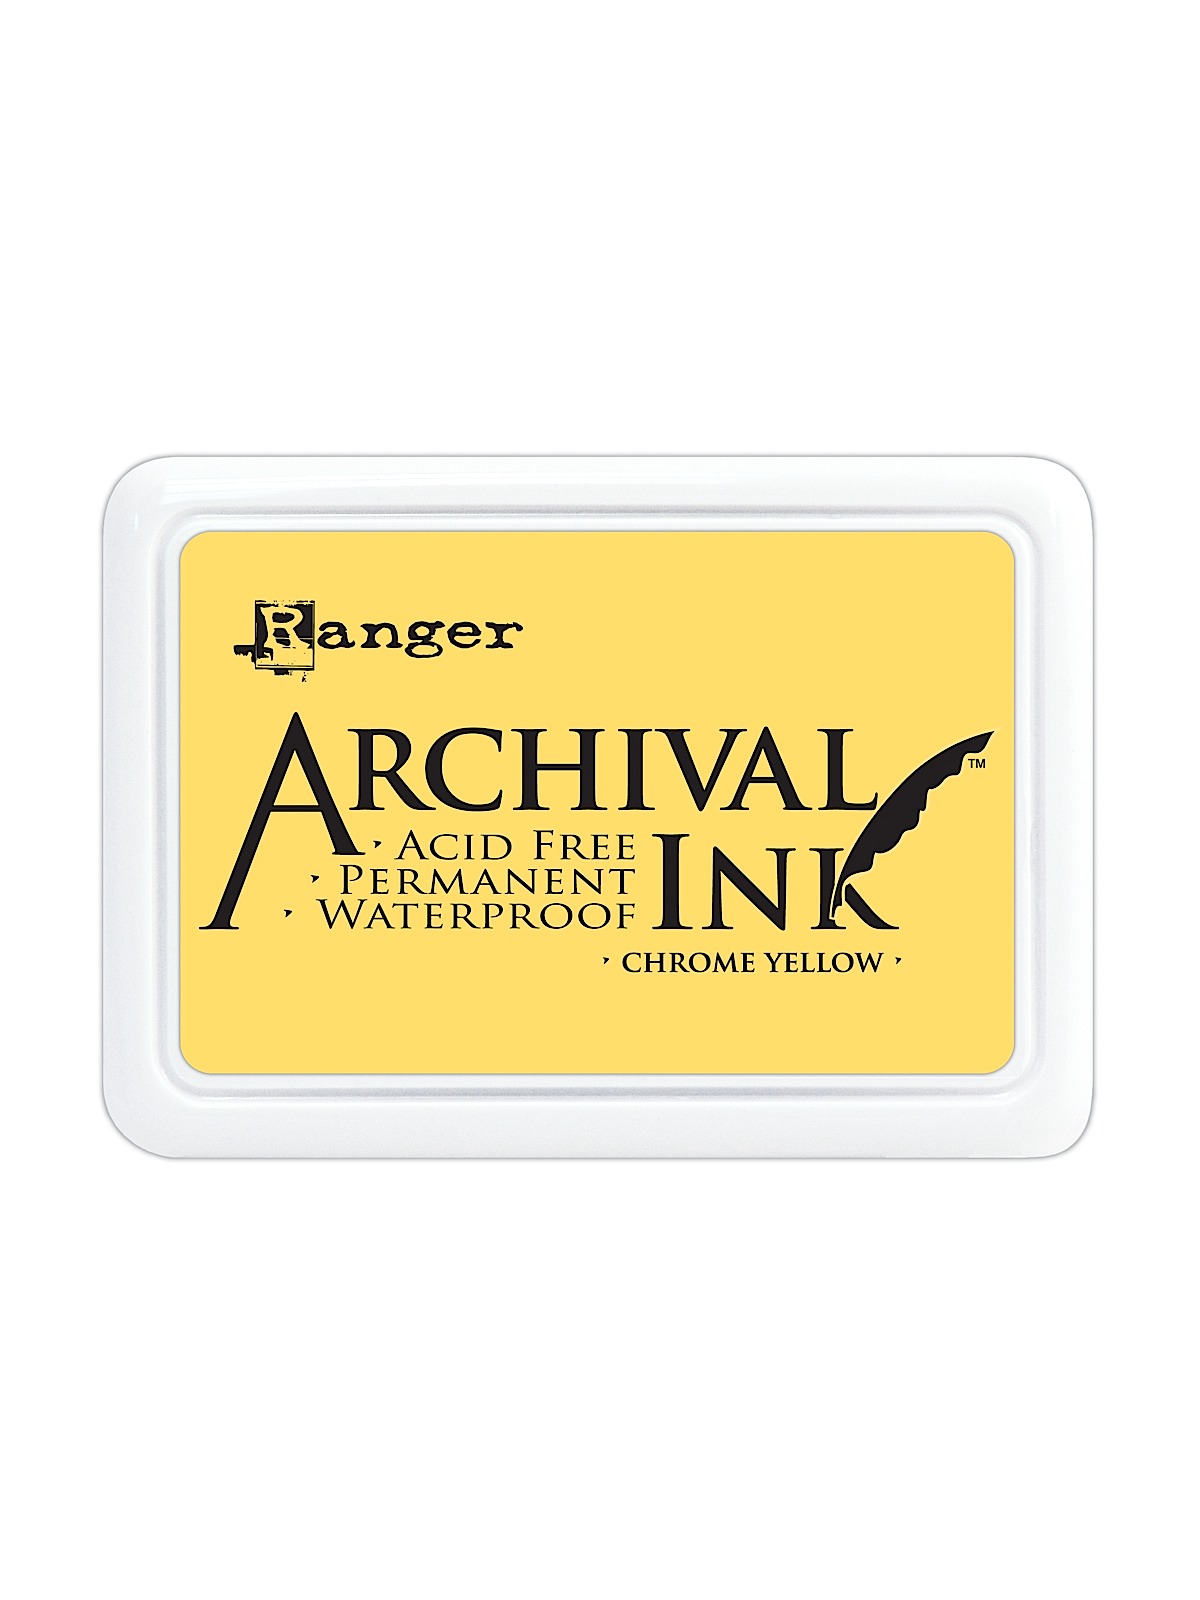 Archival Ink Chrome Yellow 2 1 2 In. X 3 3 4 In. Pad